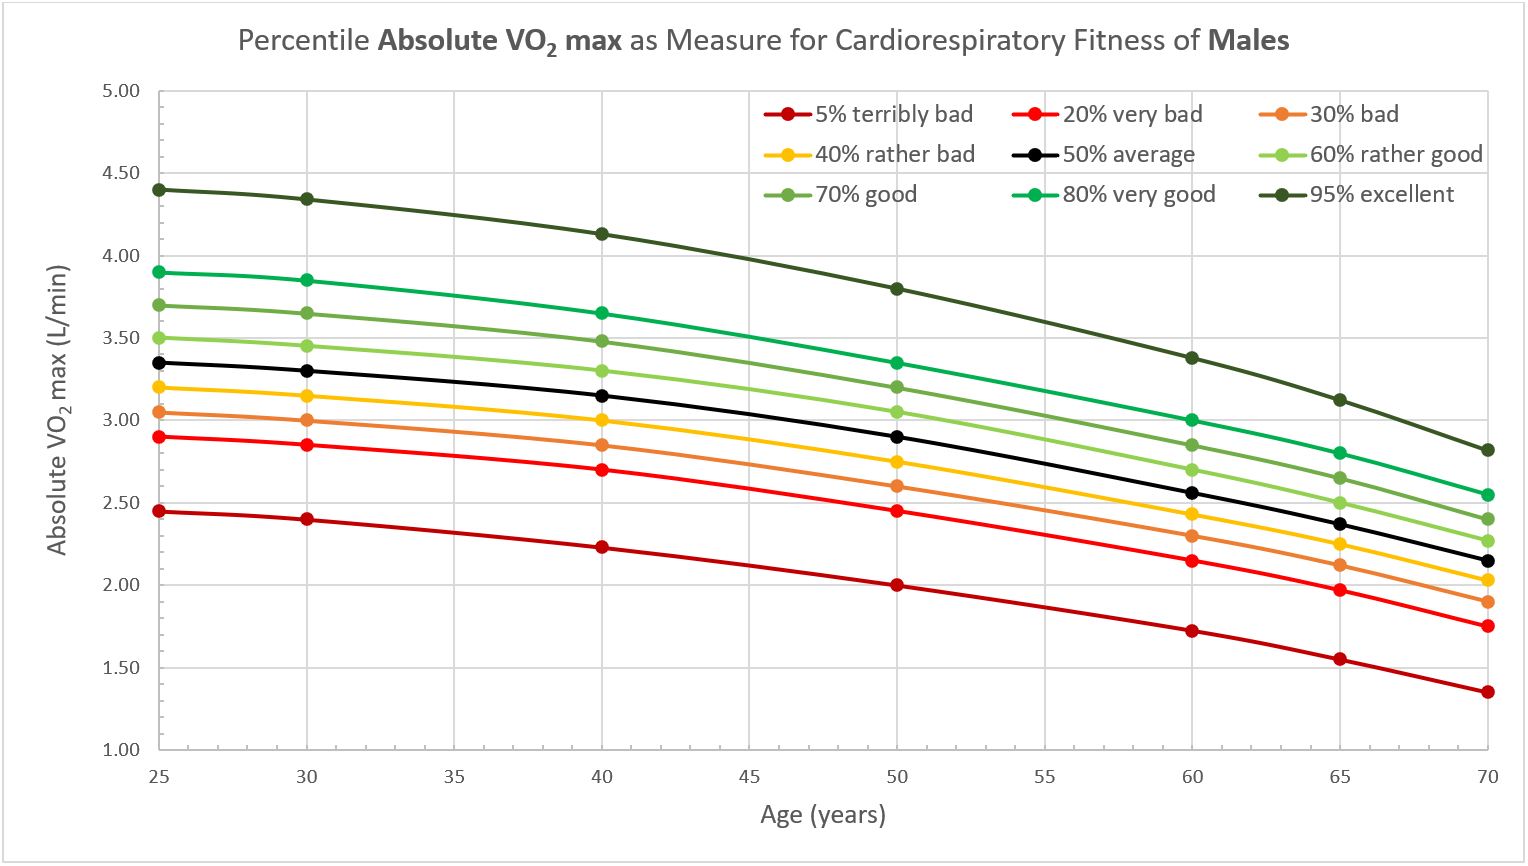 Absolute VO2 max reference chart for males